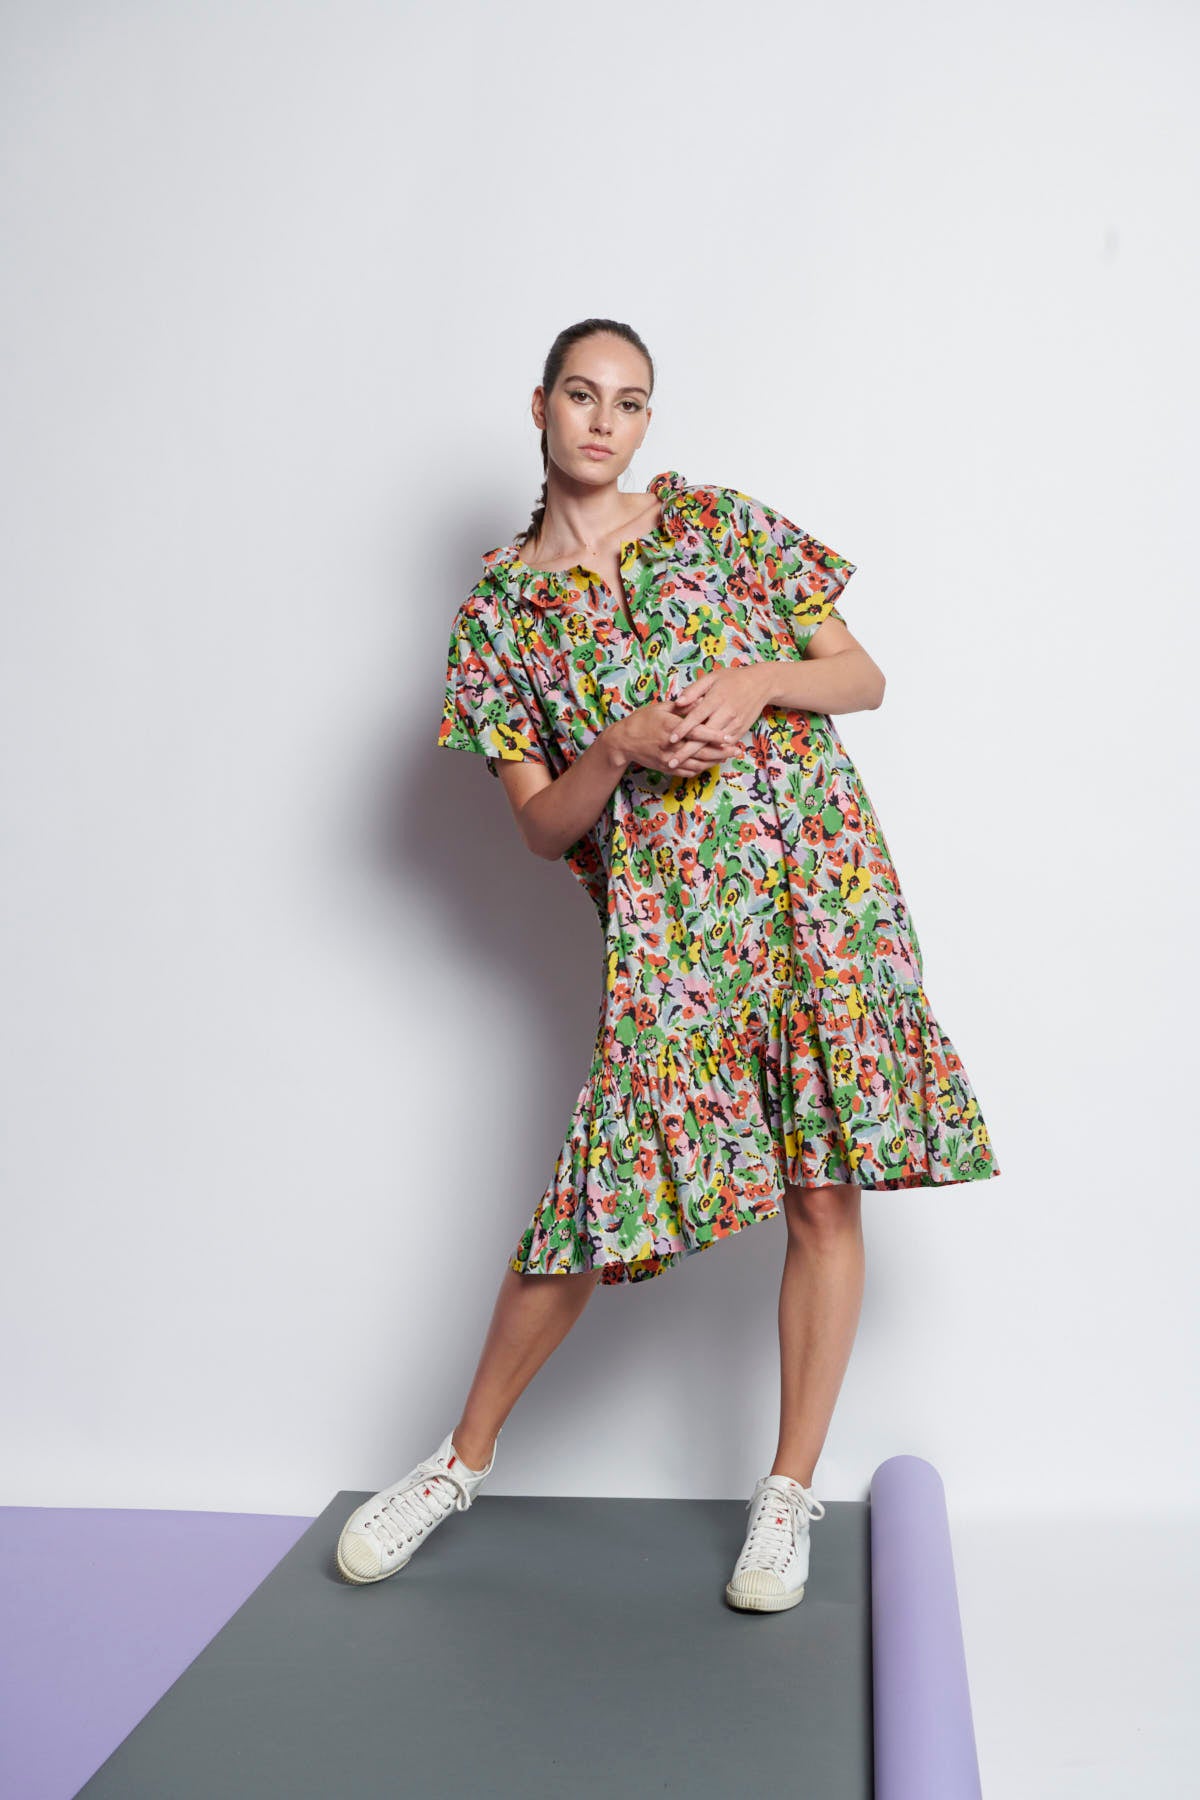 A floral, easy-fit, knee-length summer dress made of cotton and has ruffled neckline and gathers at hem